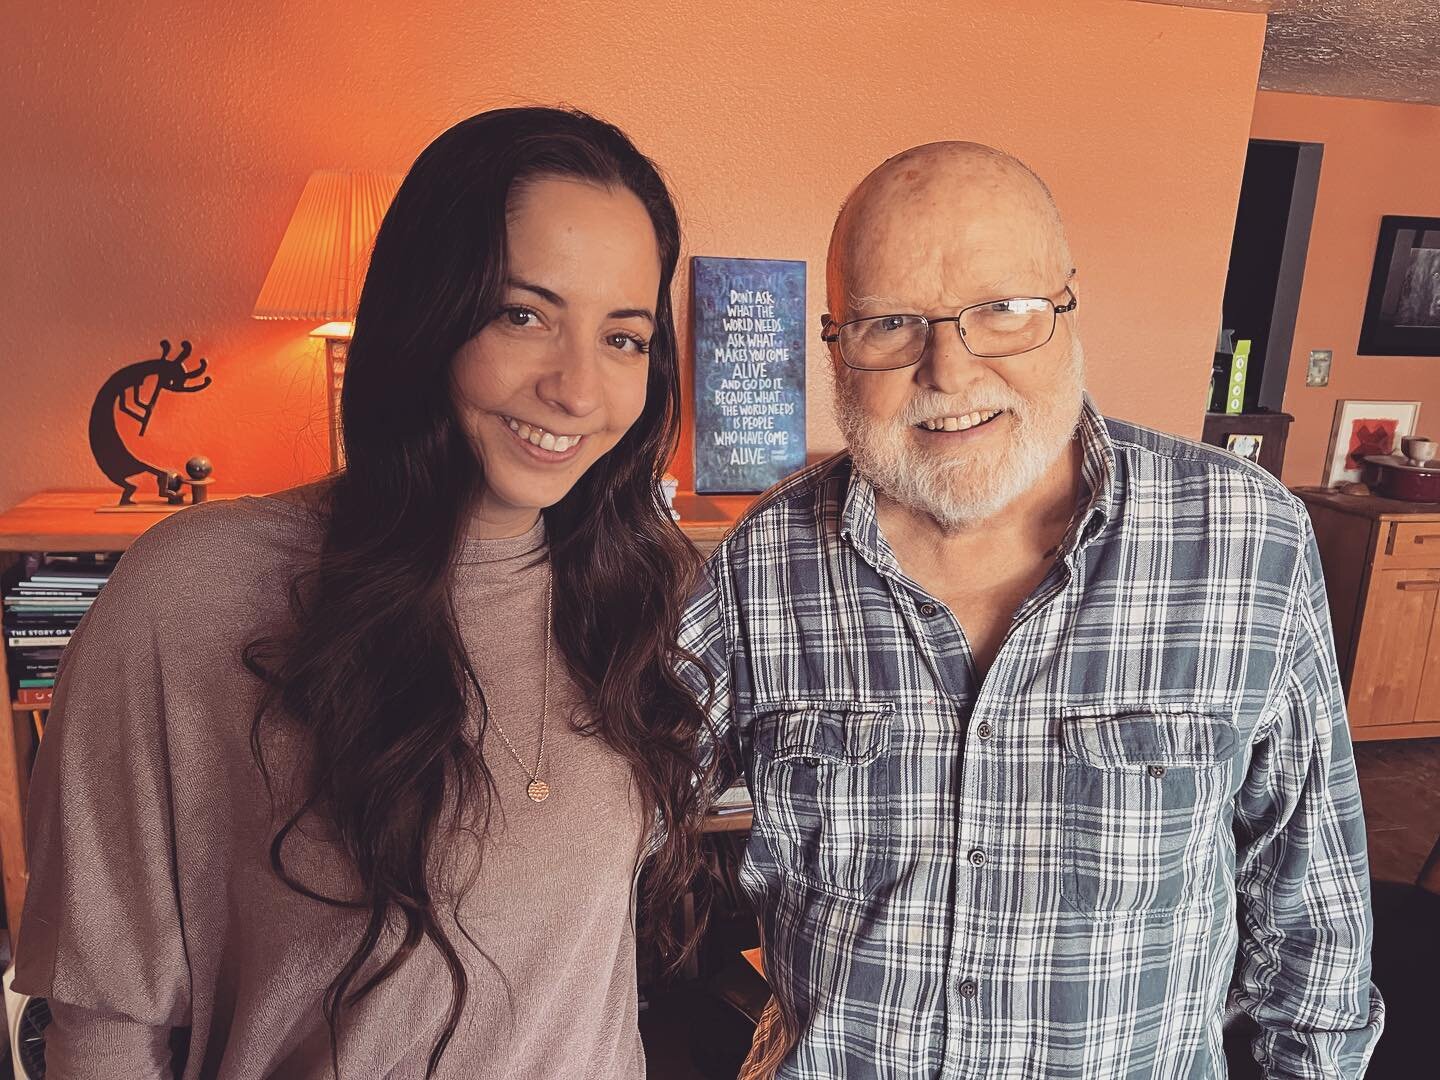 It was an honor to meet Richard Rohr, a Living Saint (who would never call himself that), whose words have deeply impacted my life and faith. 

Ive been meditating on the Thurman quote that Rohr had on his wall for weeks (swipe). I even mentioned it 